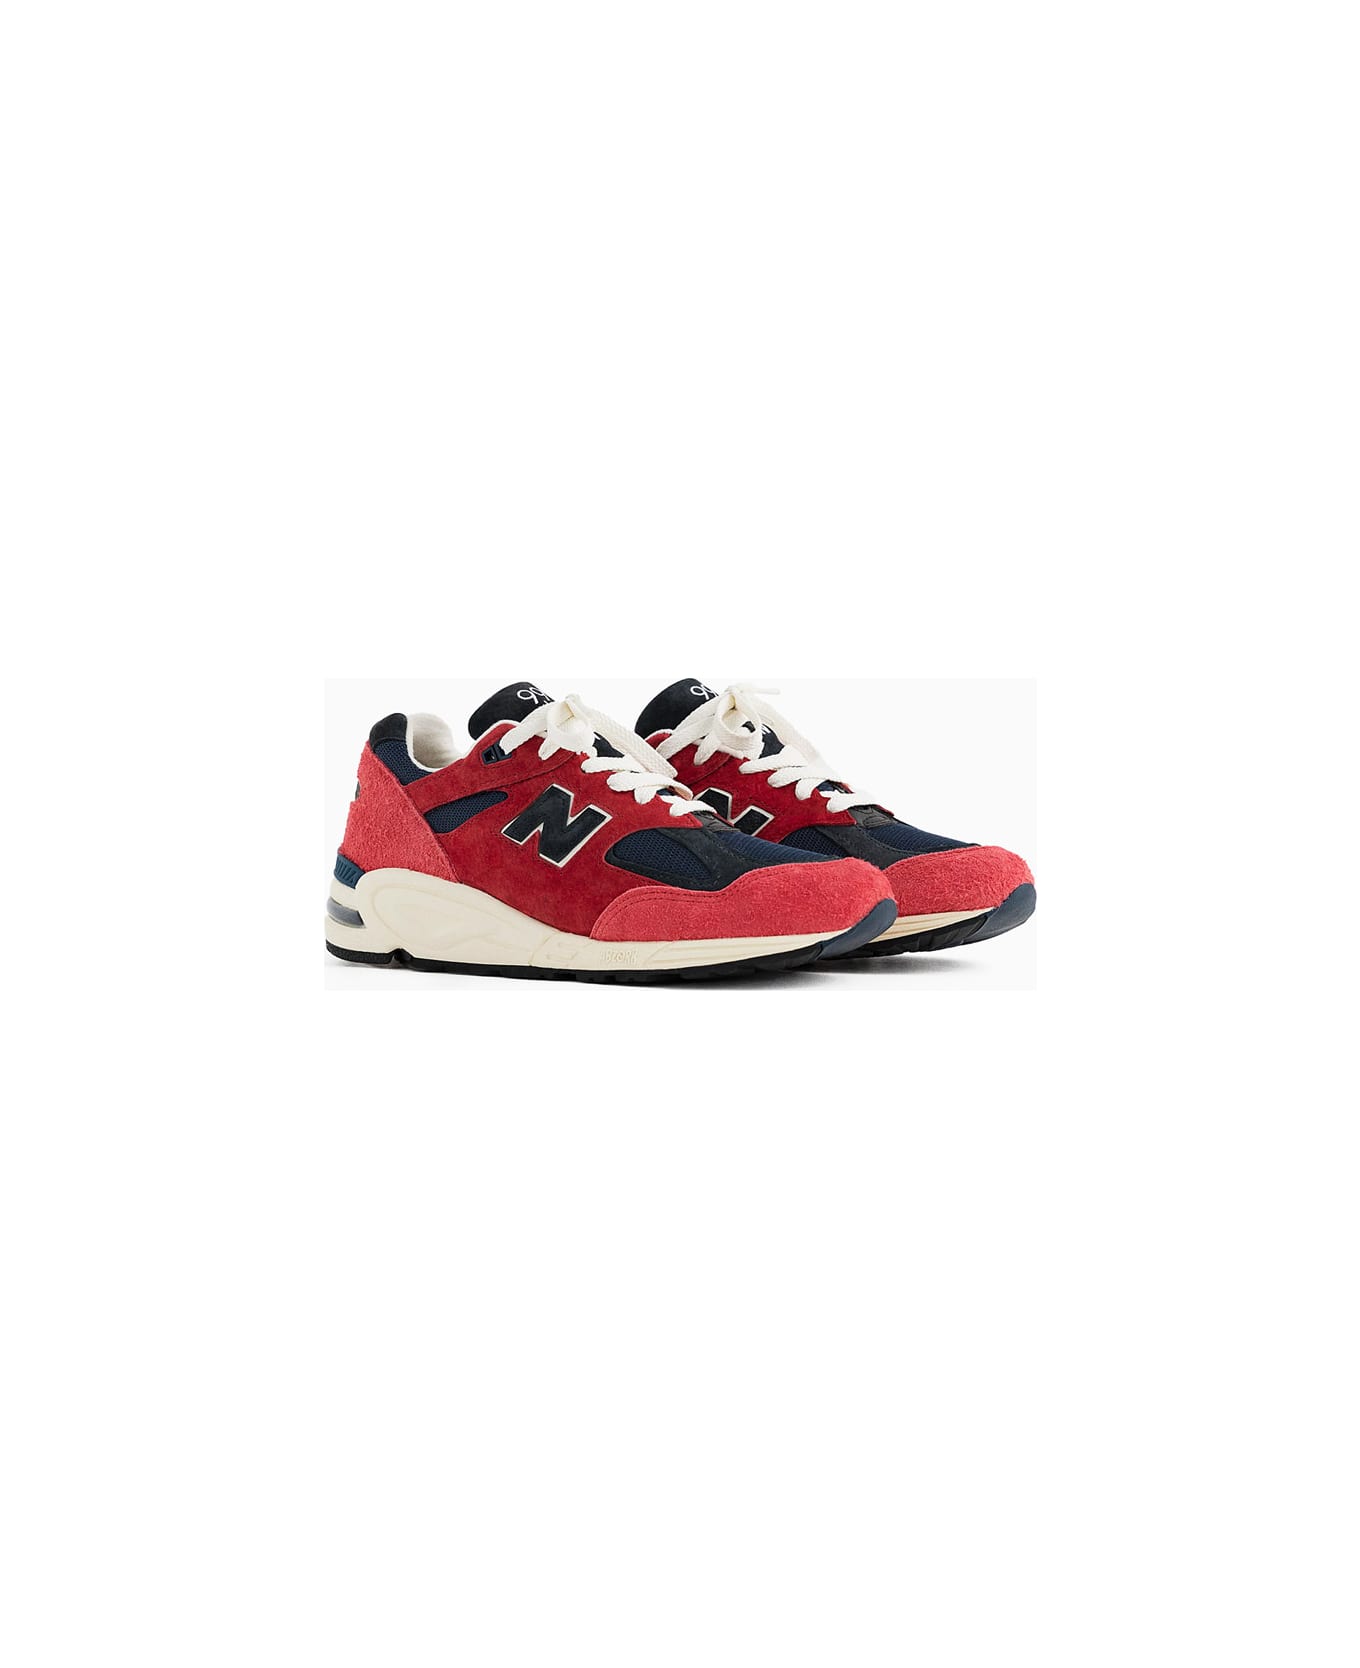 New Balance Sneakers New Balance 990 Made In Usa M990ad2 - RED